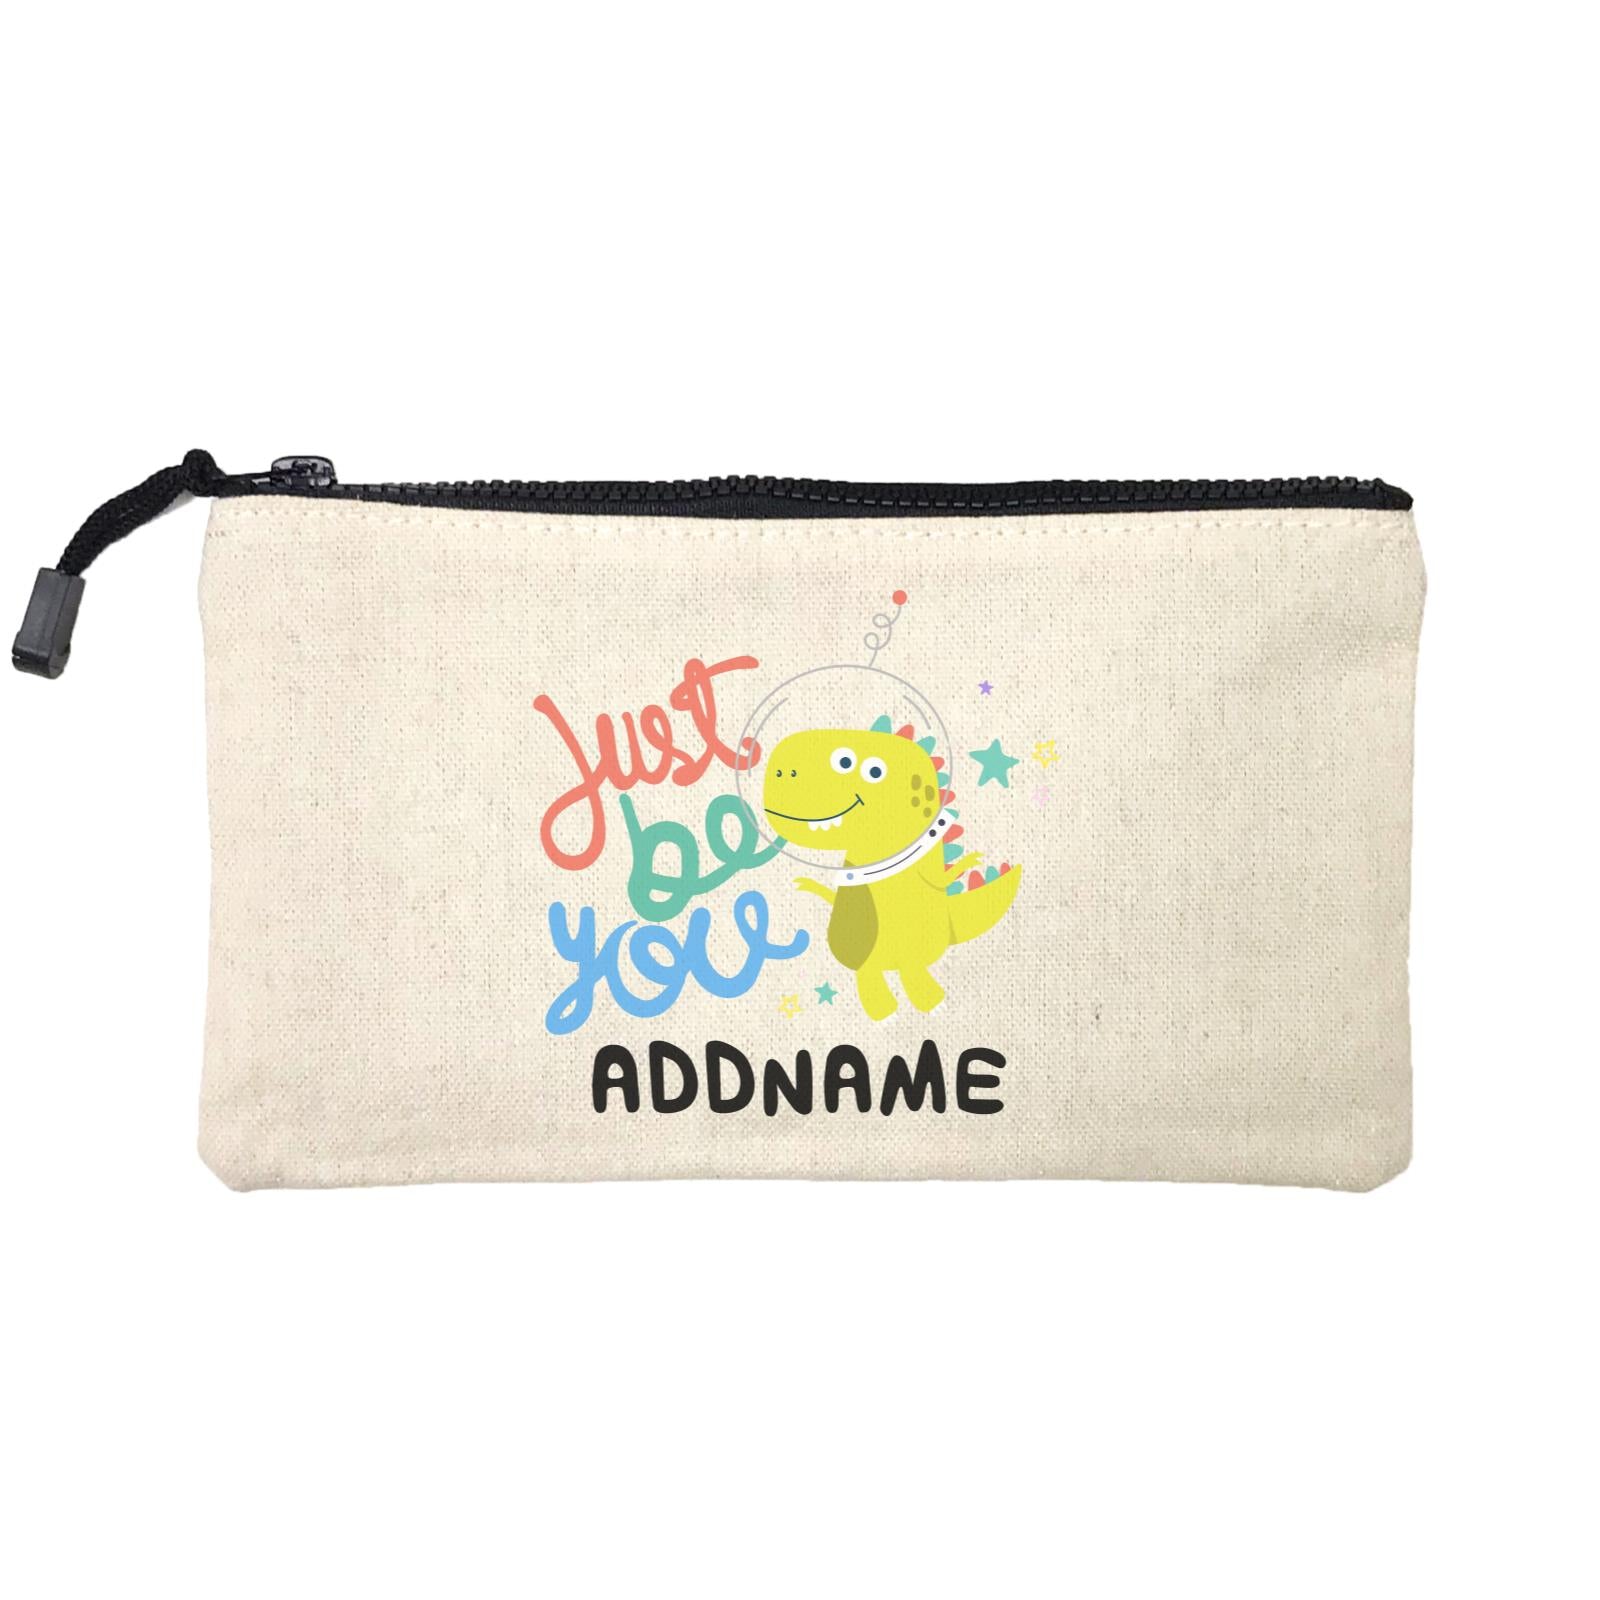 Children's Day Gift Series Just Be You Space Dinosaur Addname SP Stationery Pouch